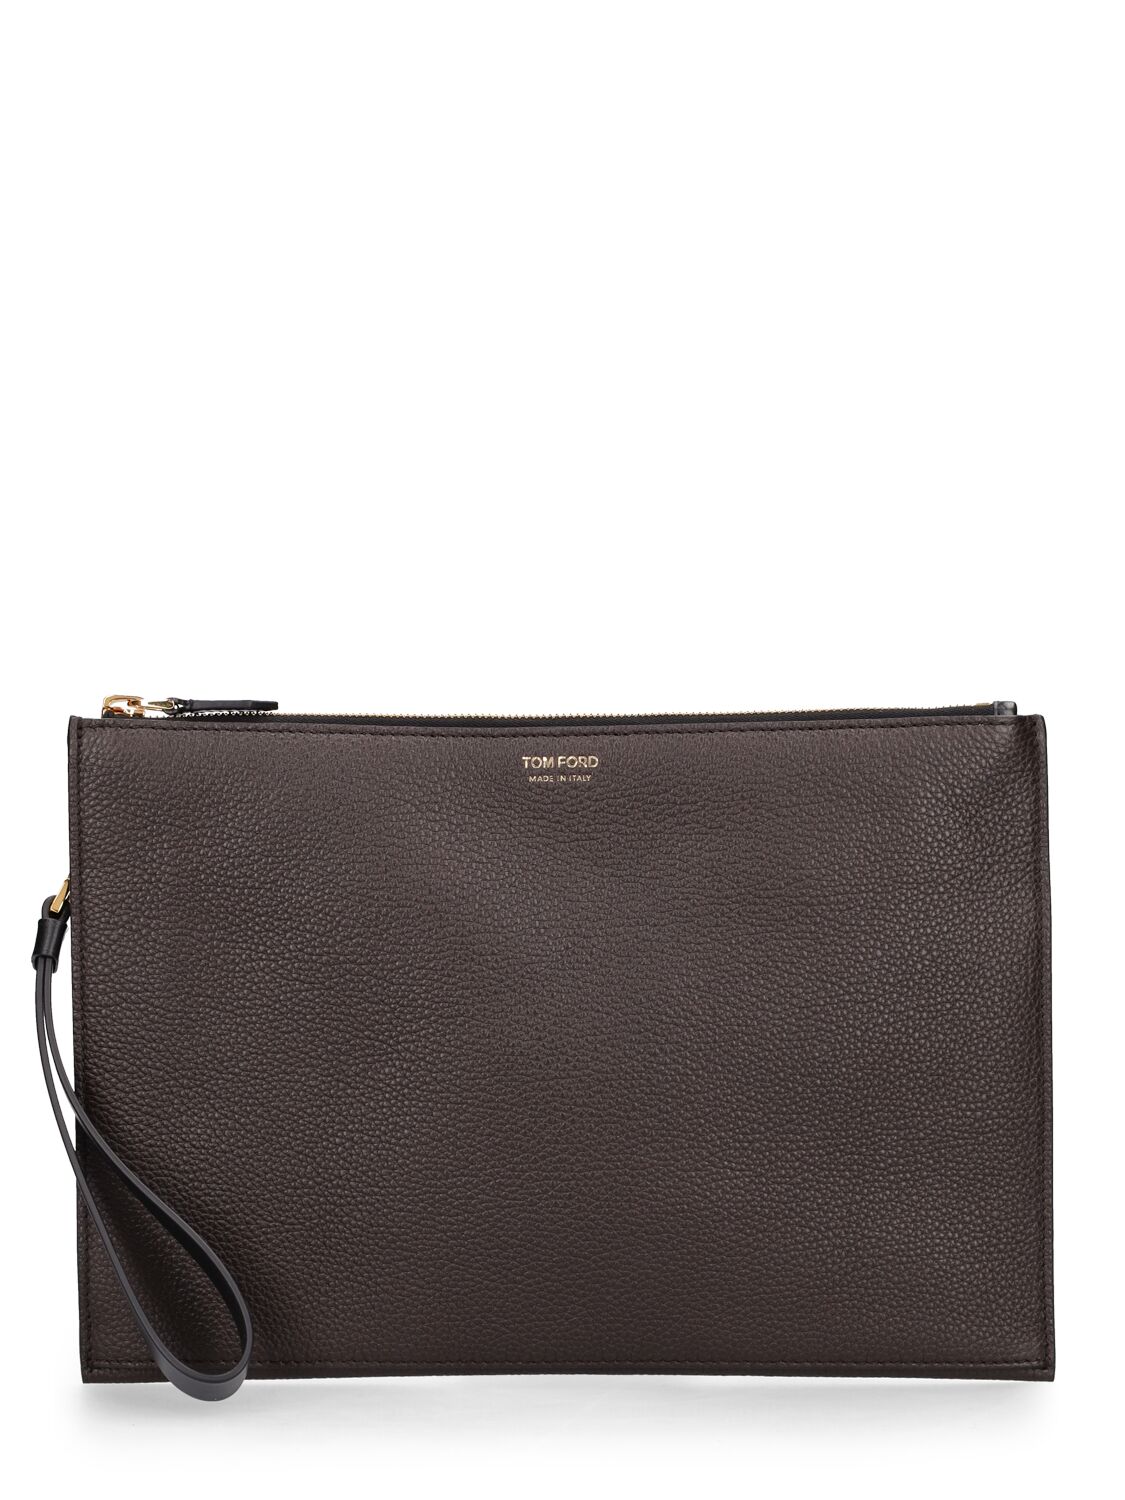 Tom Ford Logo Pouch In Brown